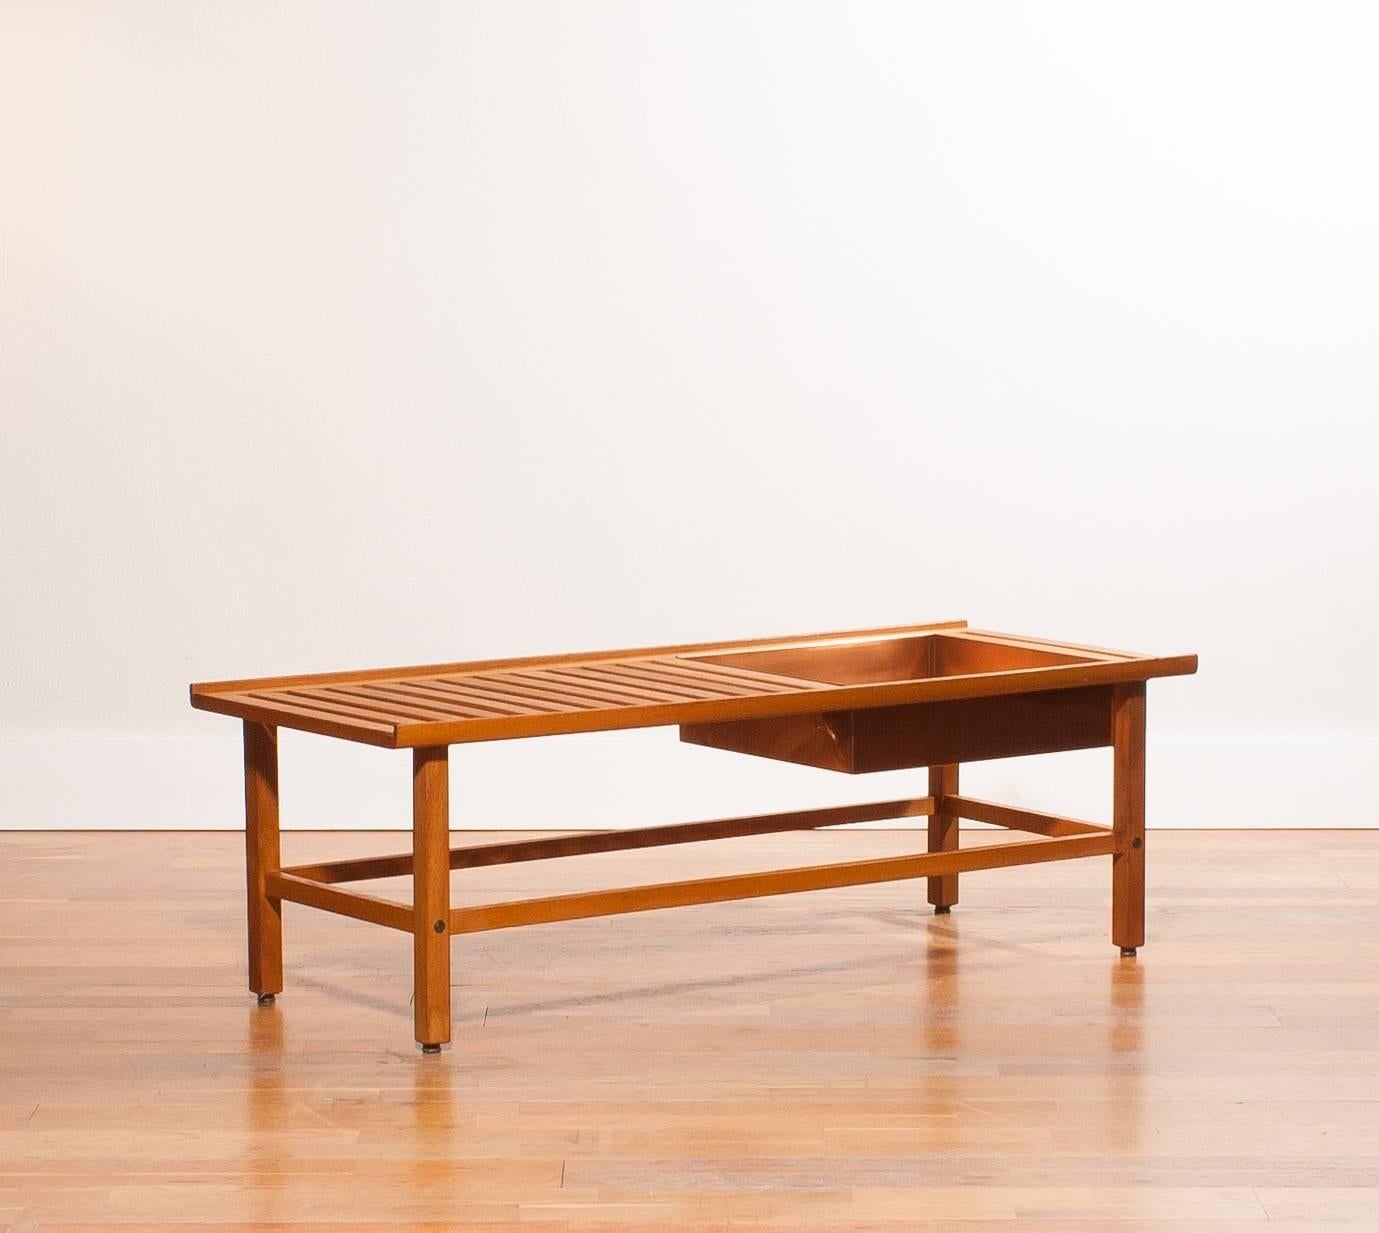 A beautiful plant bench designed by Yngve Ekström.
The bench is made of teak.
There is room for plants of flowers in the copper compartment.
It is in an excellent condition.
Period 1950s
Dimensions: H 39 cm , D 48 cm , W 120 cm.